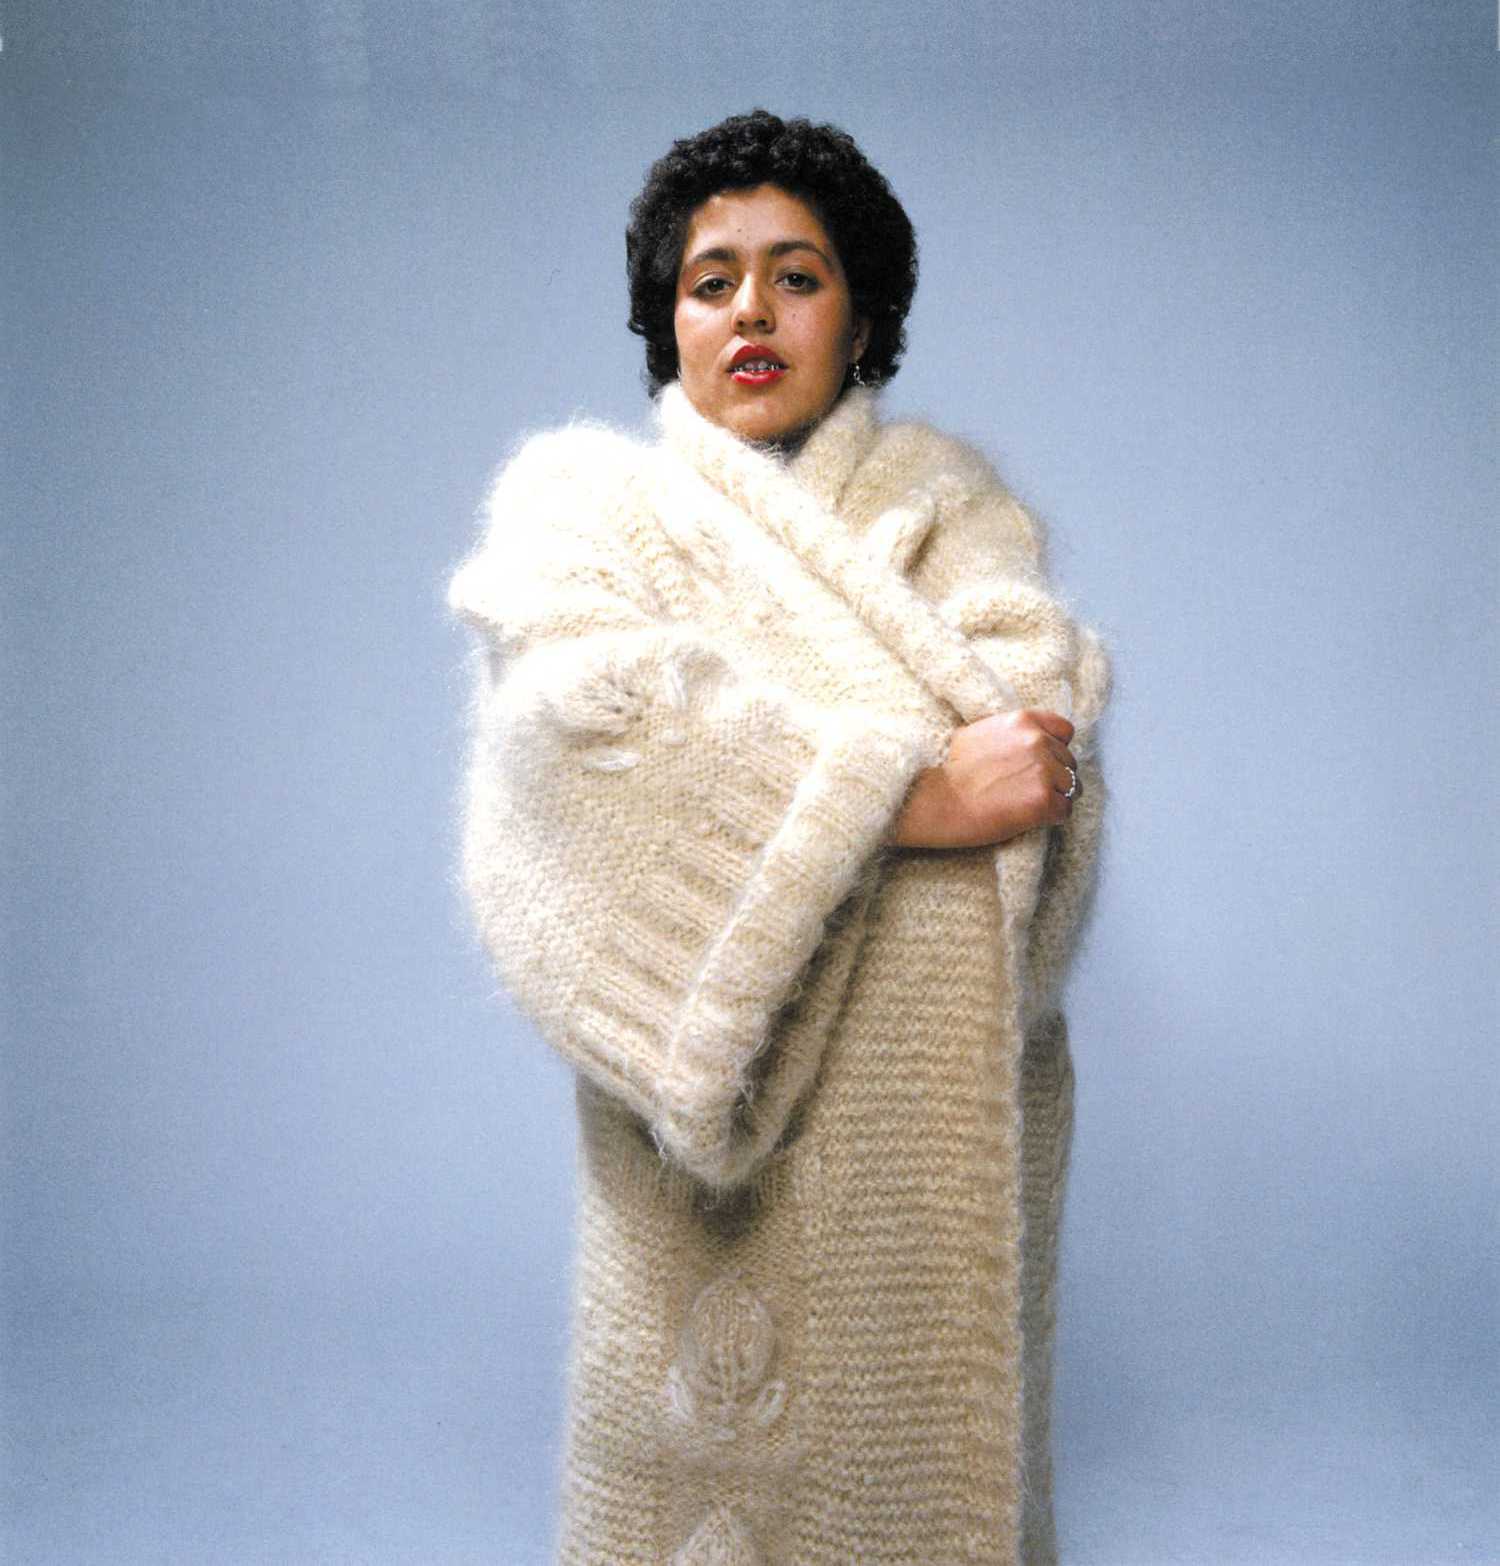 Poly Styrene: I Am a Cliché Some people still think little girls should be seen and not heard